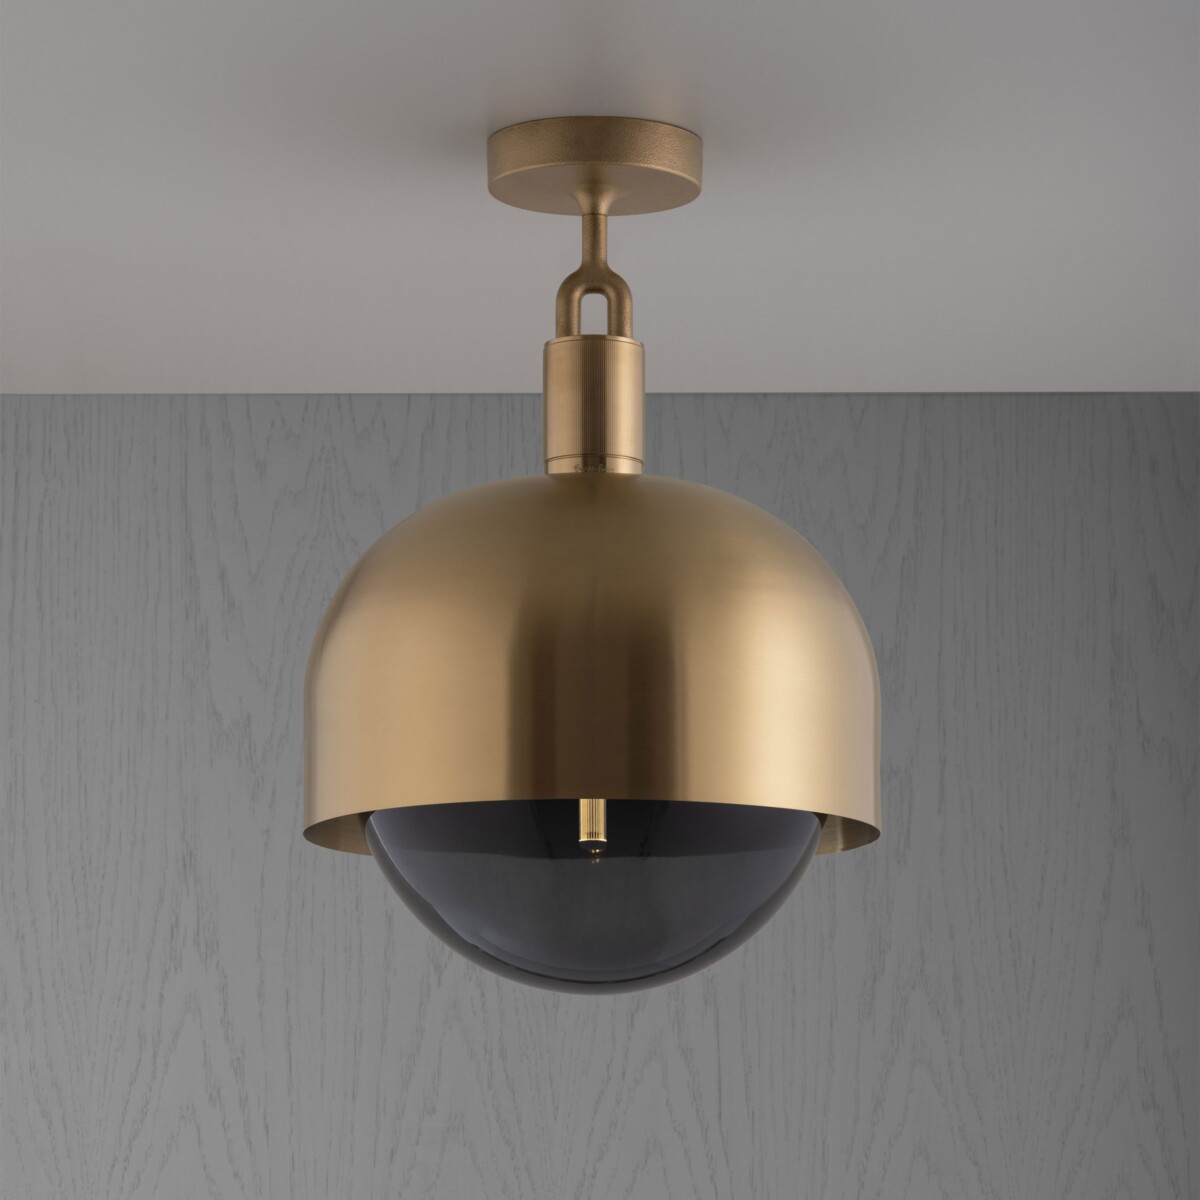 Forked_lighting_Ceiling_Brass_Large_Shade_Smoked_Globe_v1_Web-scaled